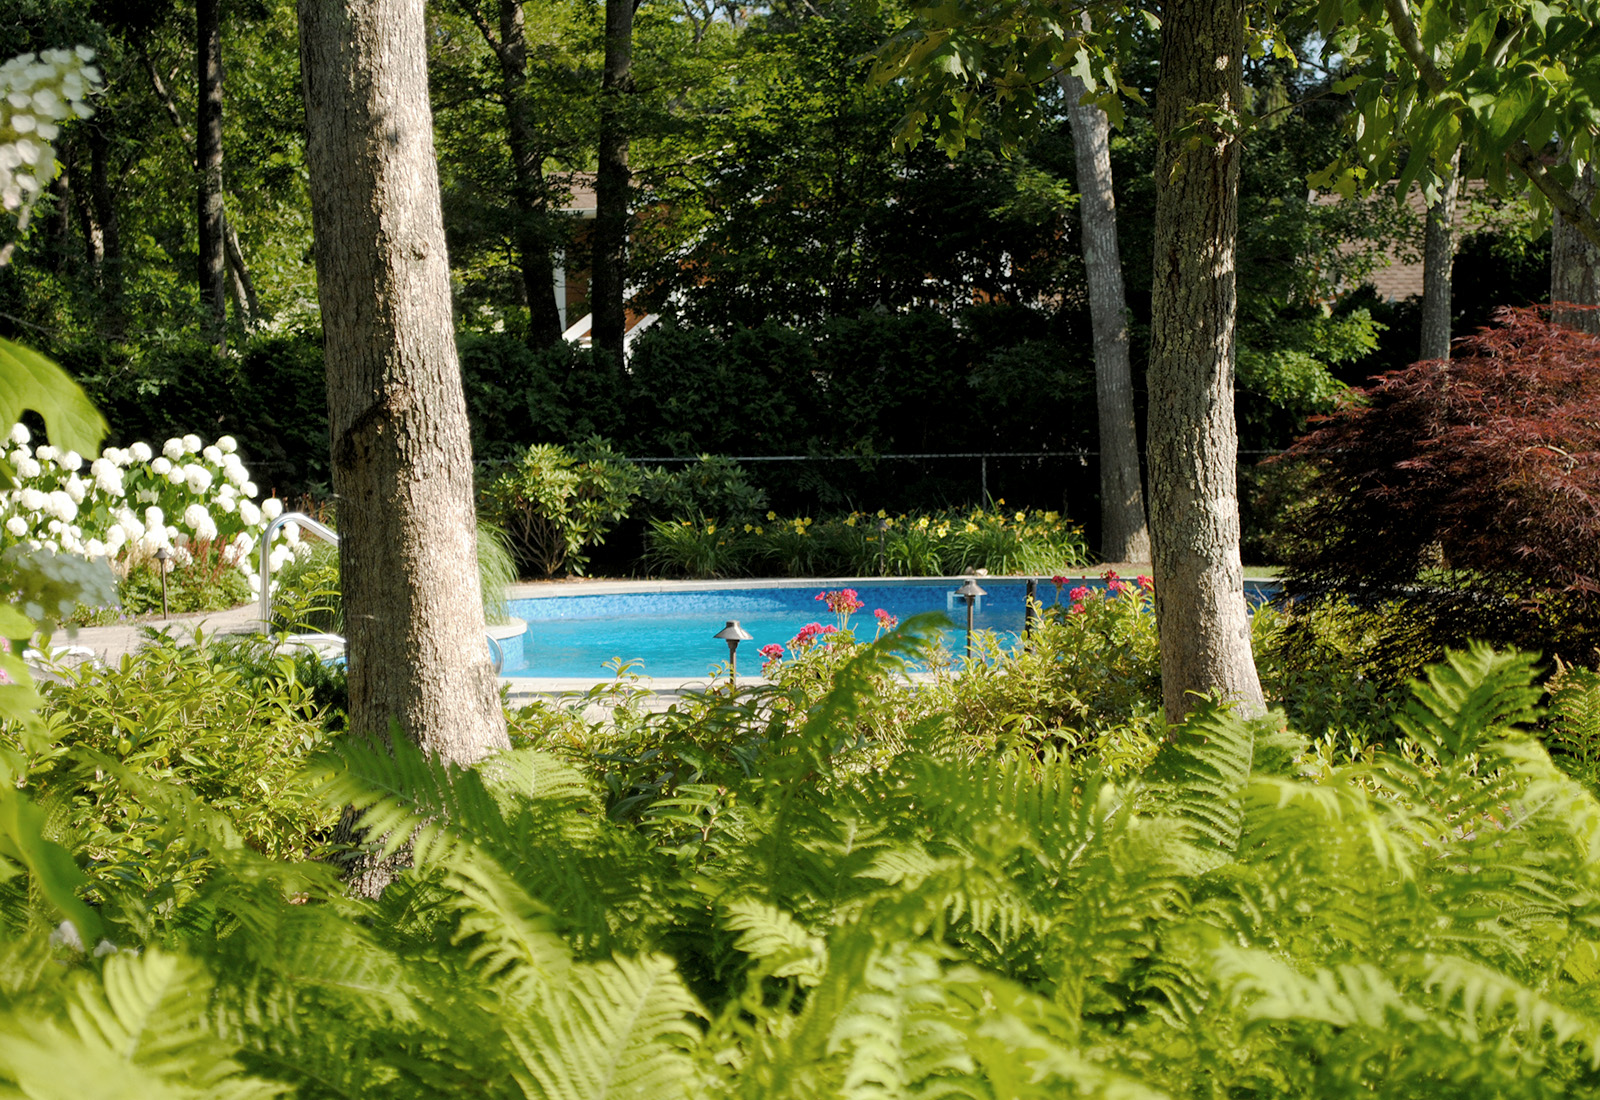 Natural, scenic planting around a pool.